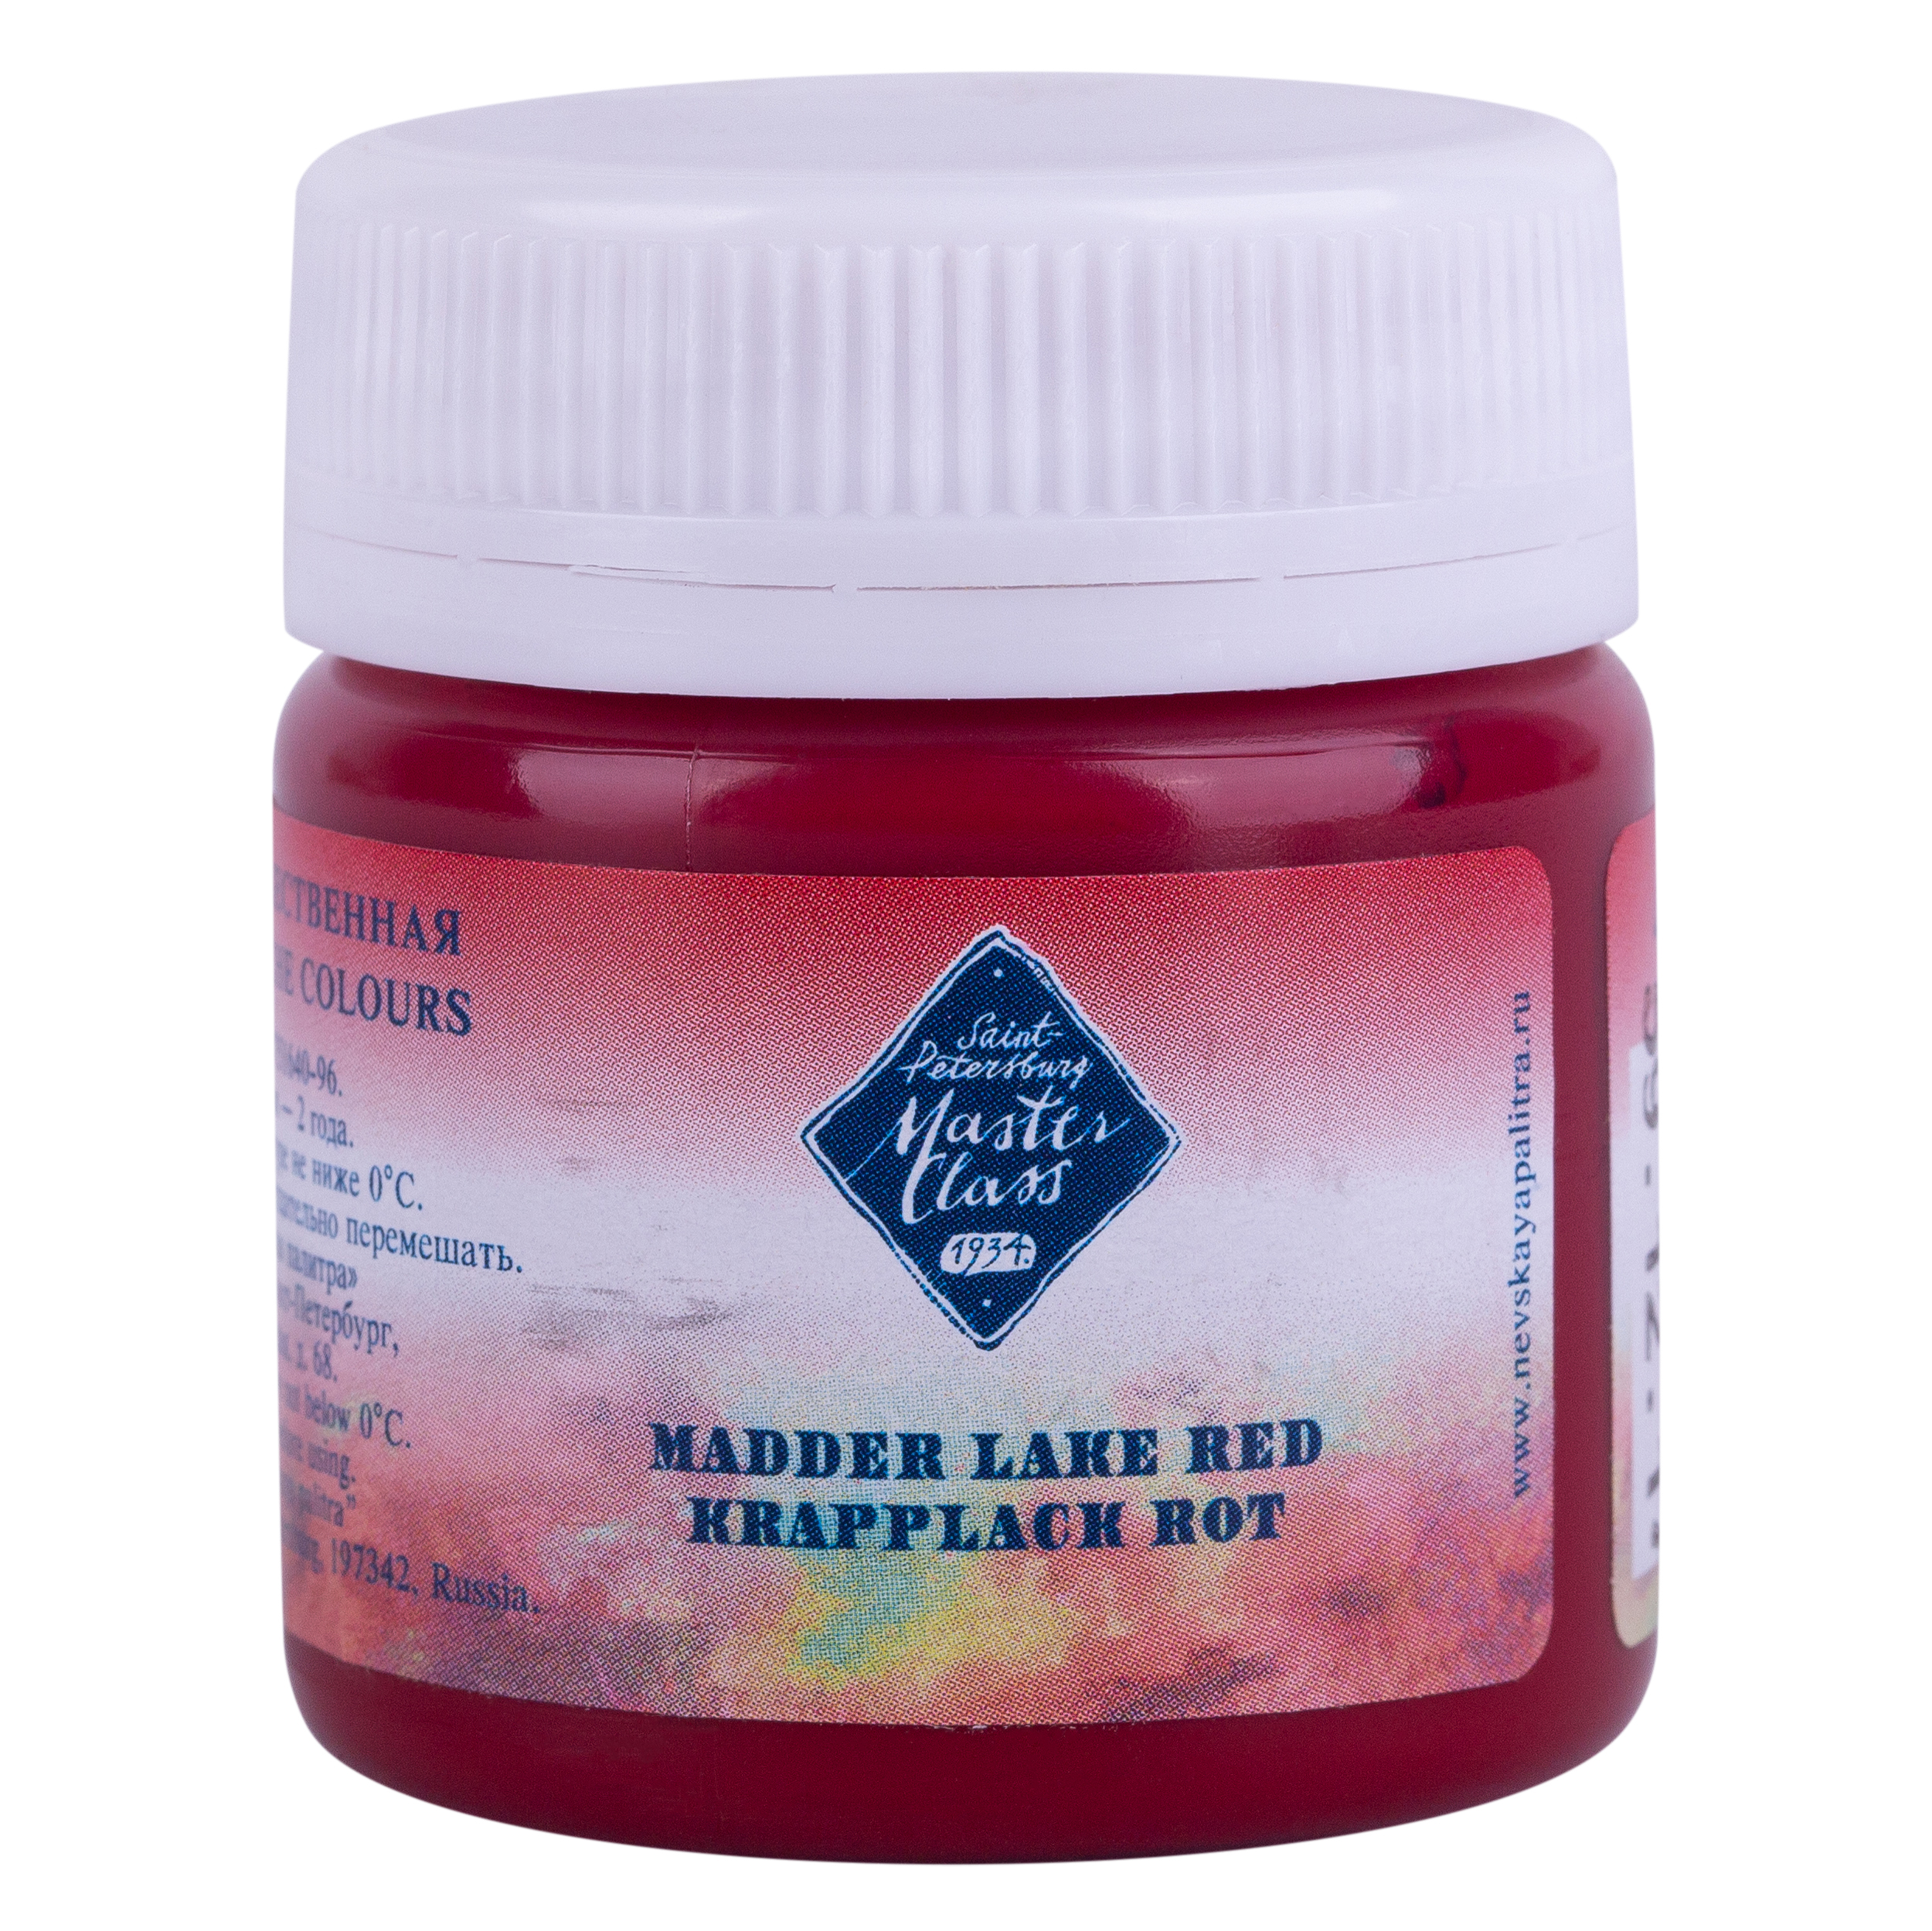 Madder lake red "Master Class" in the jar. № 339